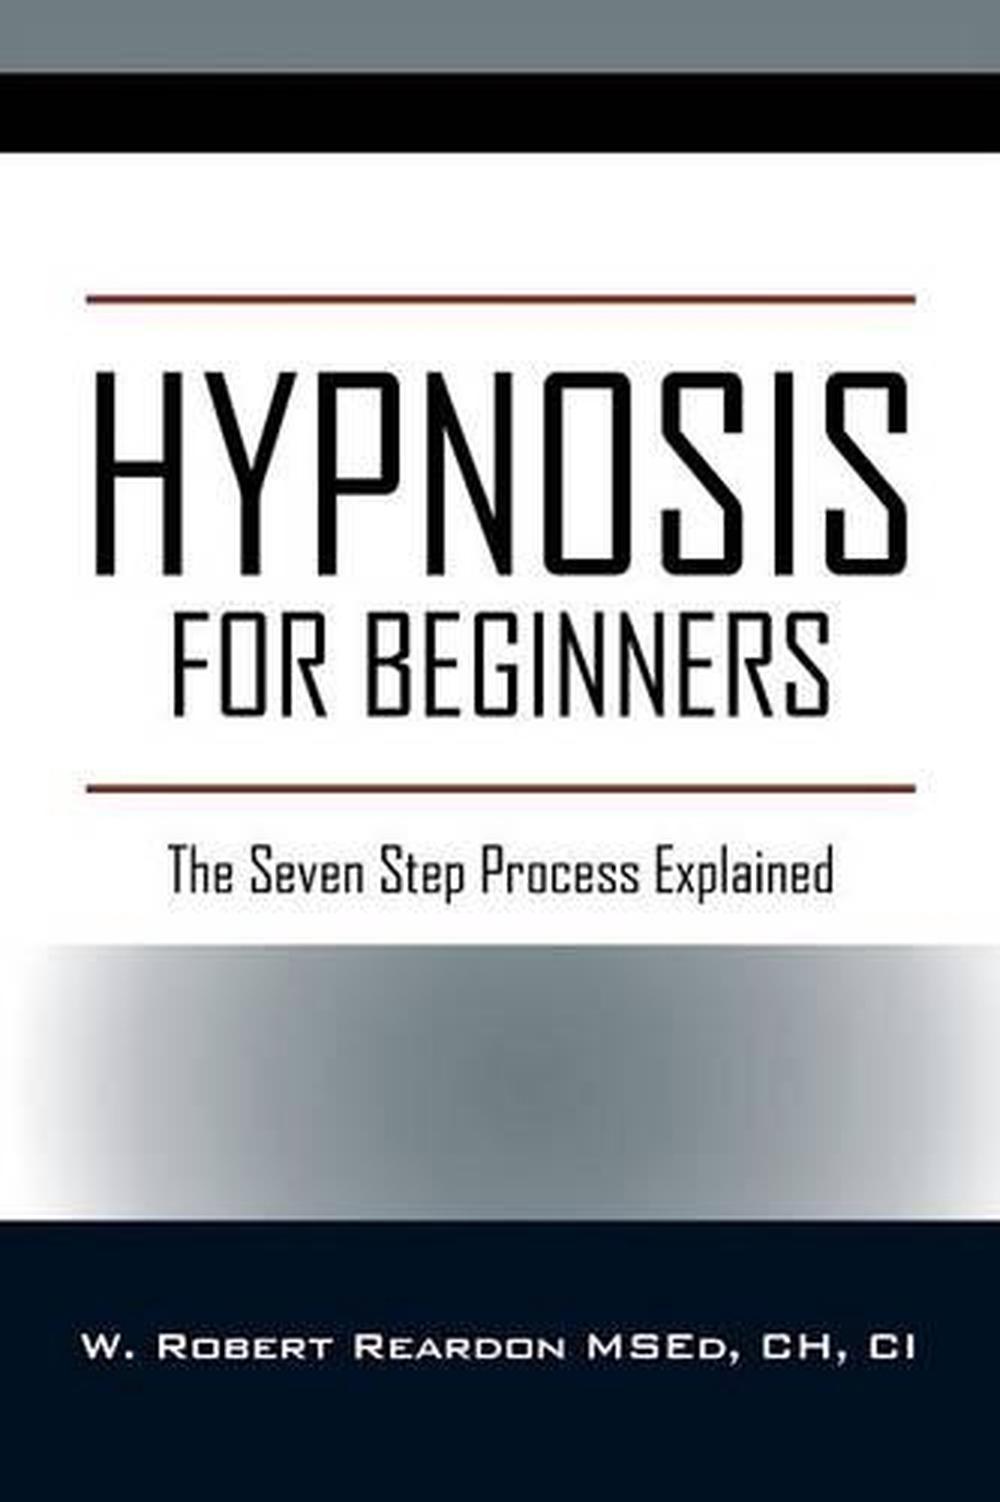 Hypnosis for Beginners: The Seven Step Process Explained by W. Robert Reardon Ms